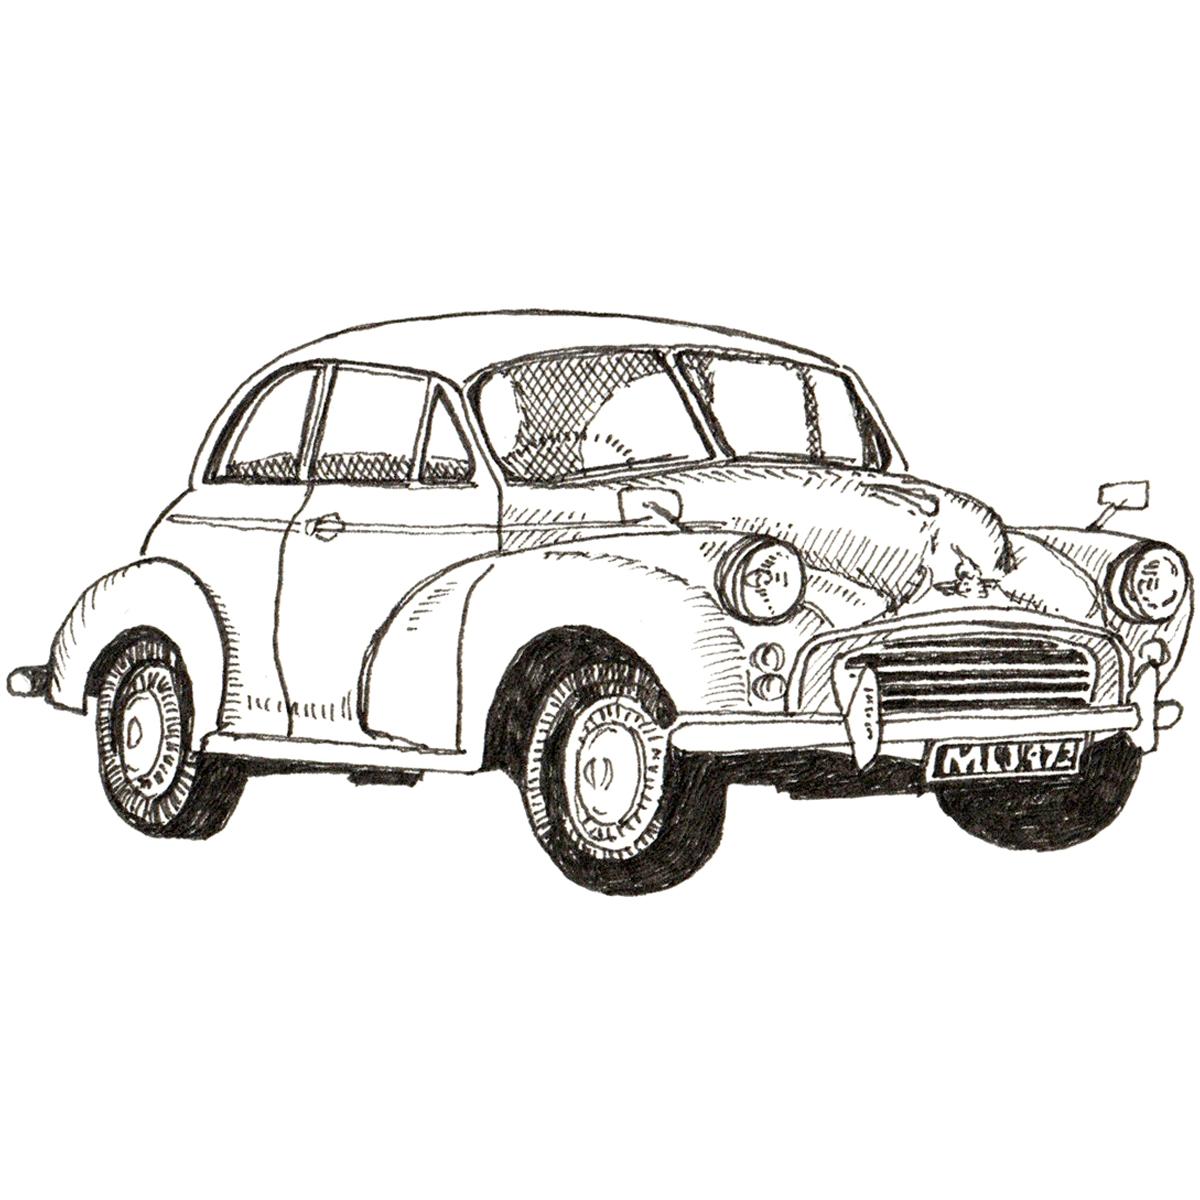 Limited edition print from pen and ink drawing of a Morris Minor